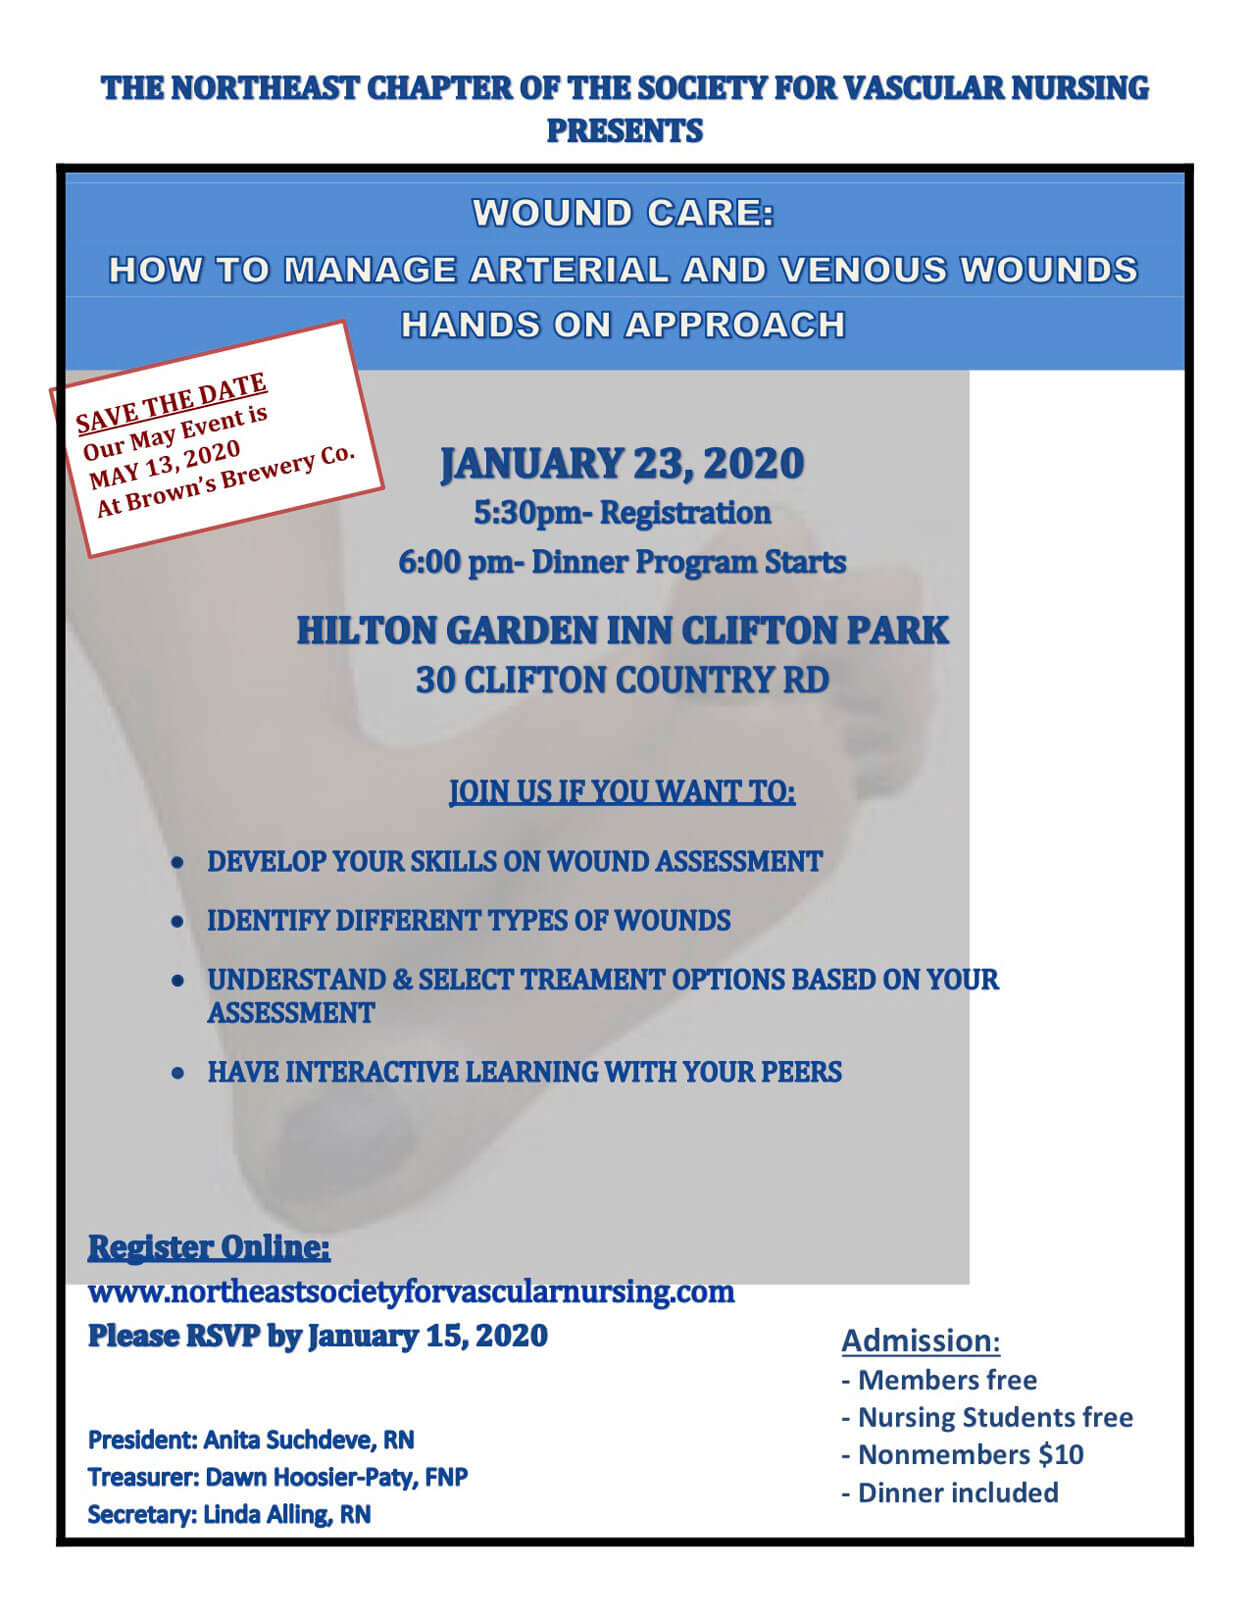 Northeast Chapter of the Society for Vascular Nursing Wound Care Event